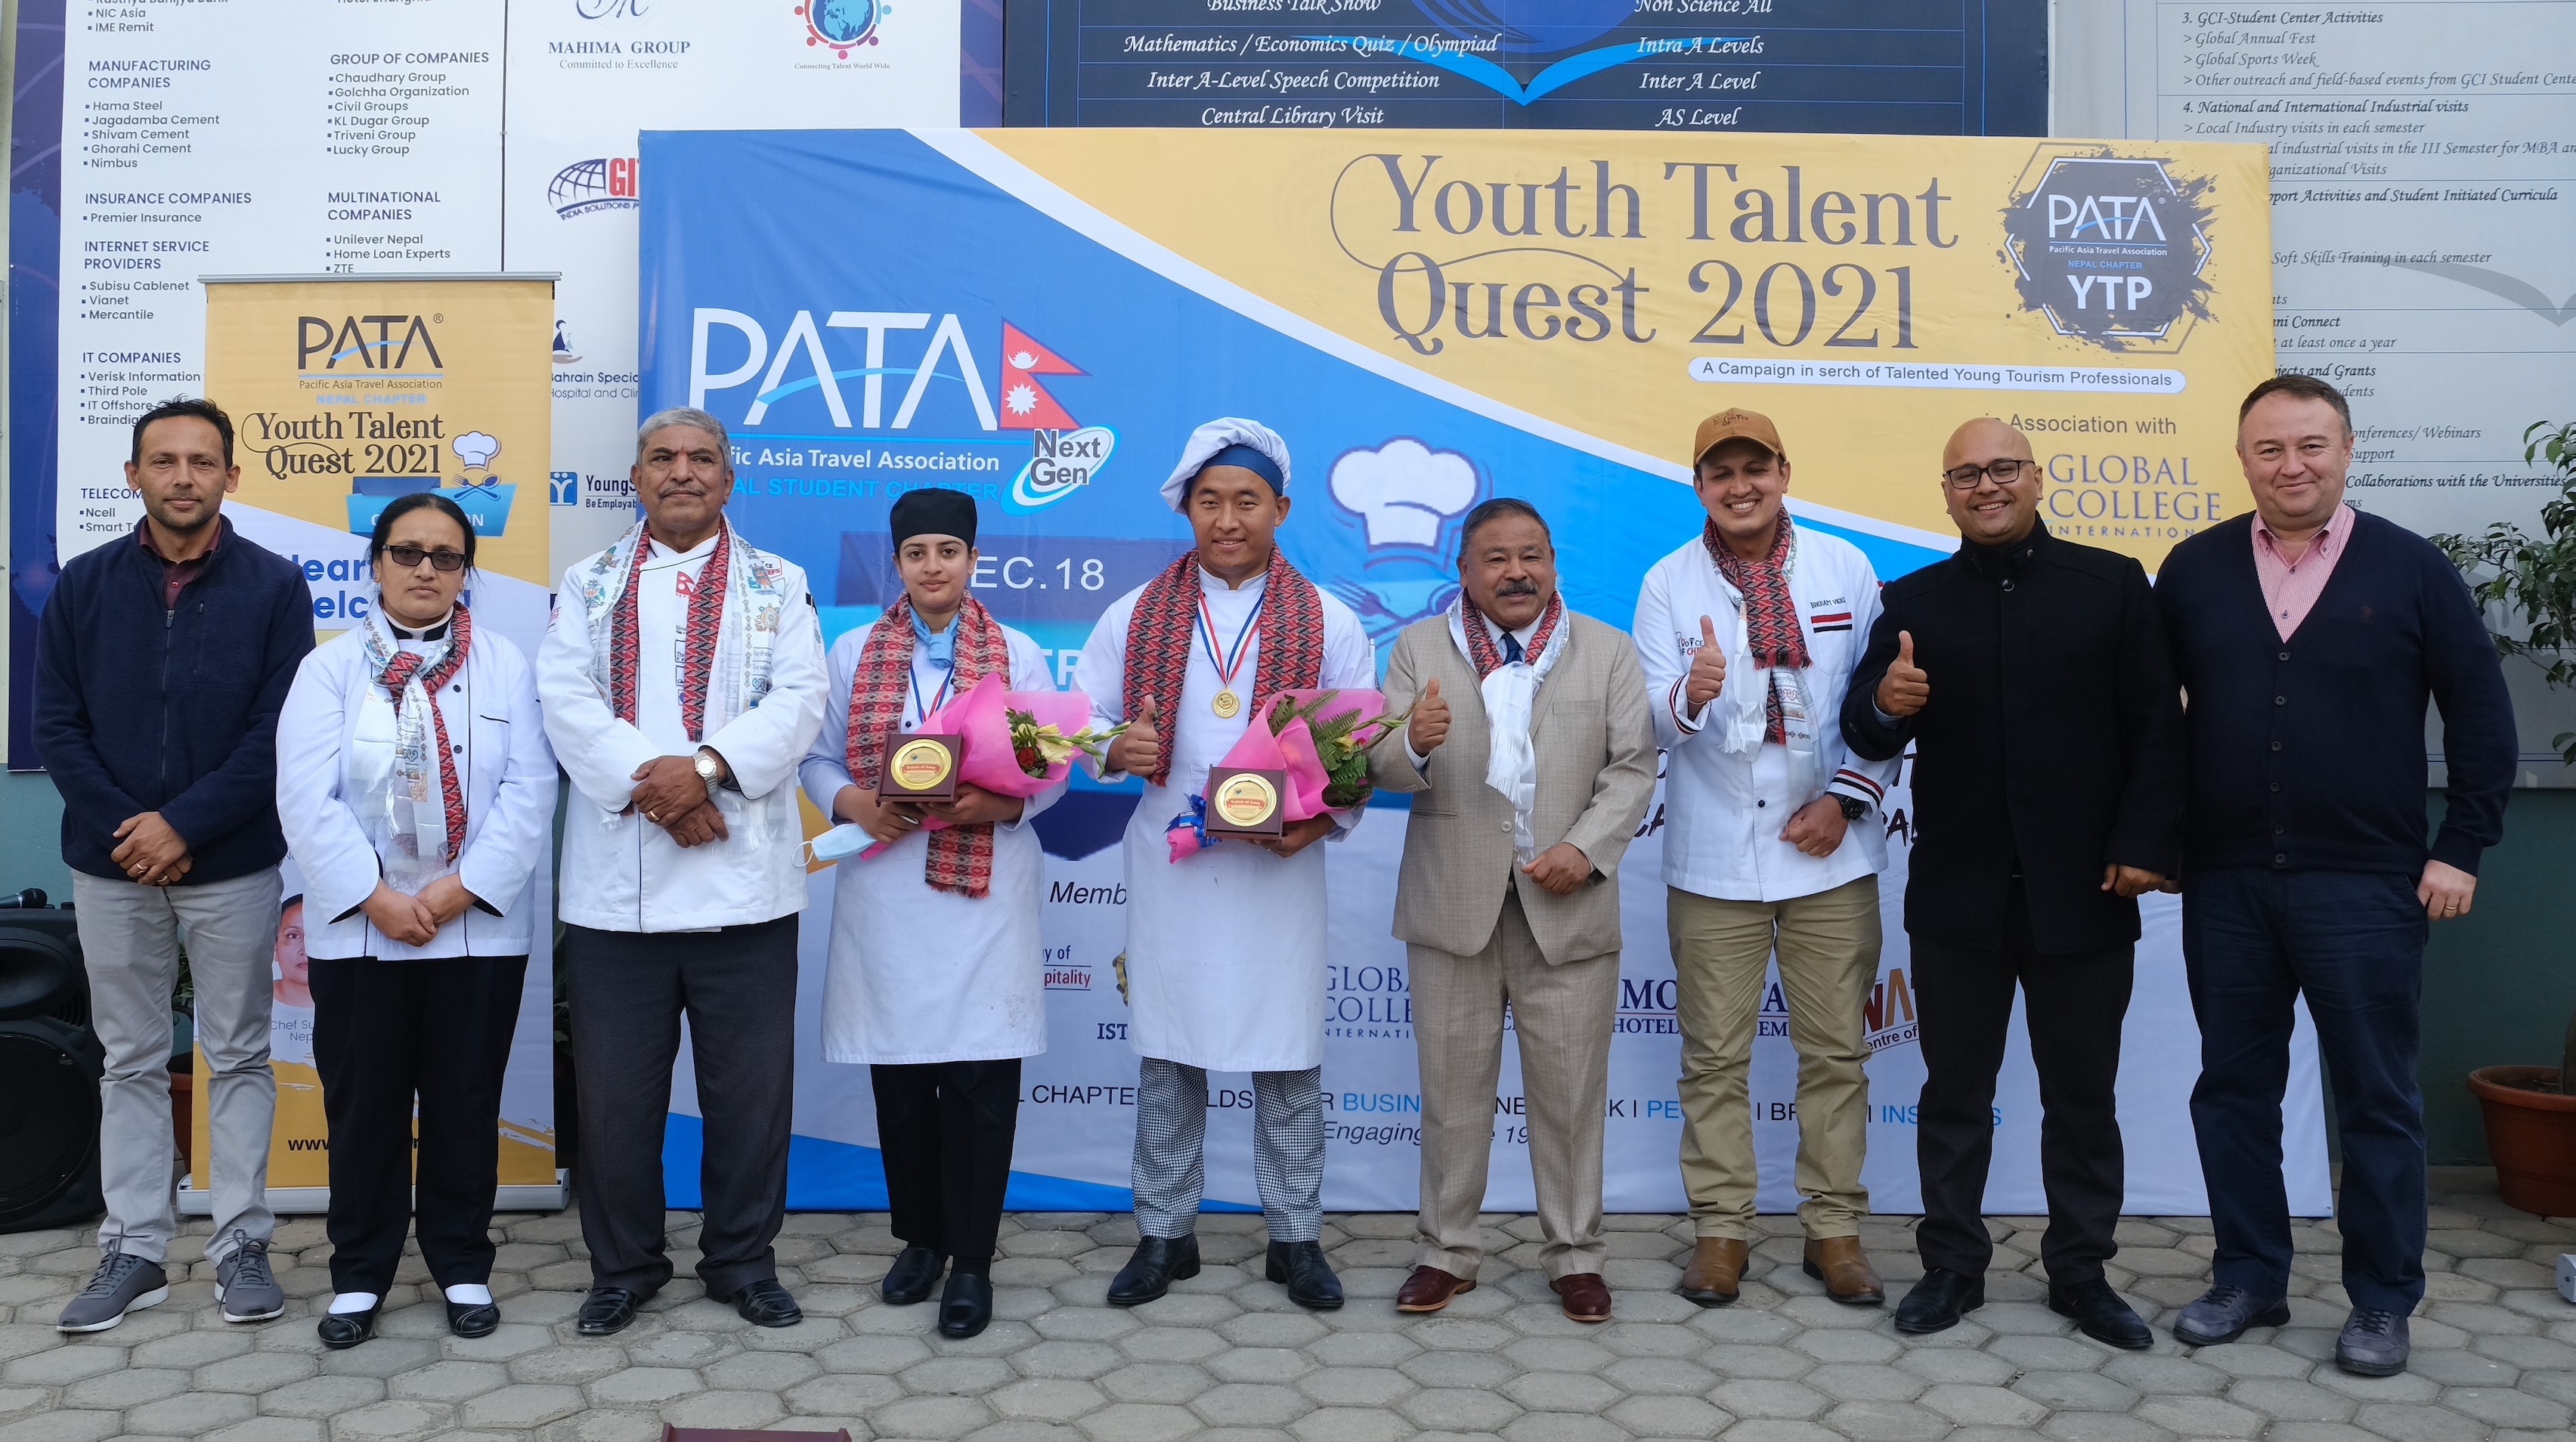 PATA Nepal Chapter organizes the PATA YTP Chefs Competition